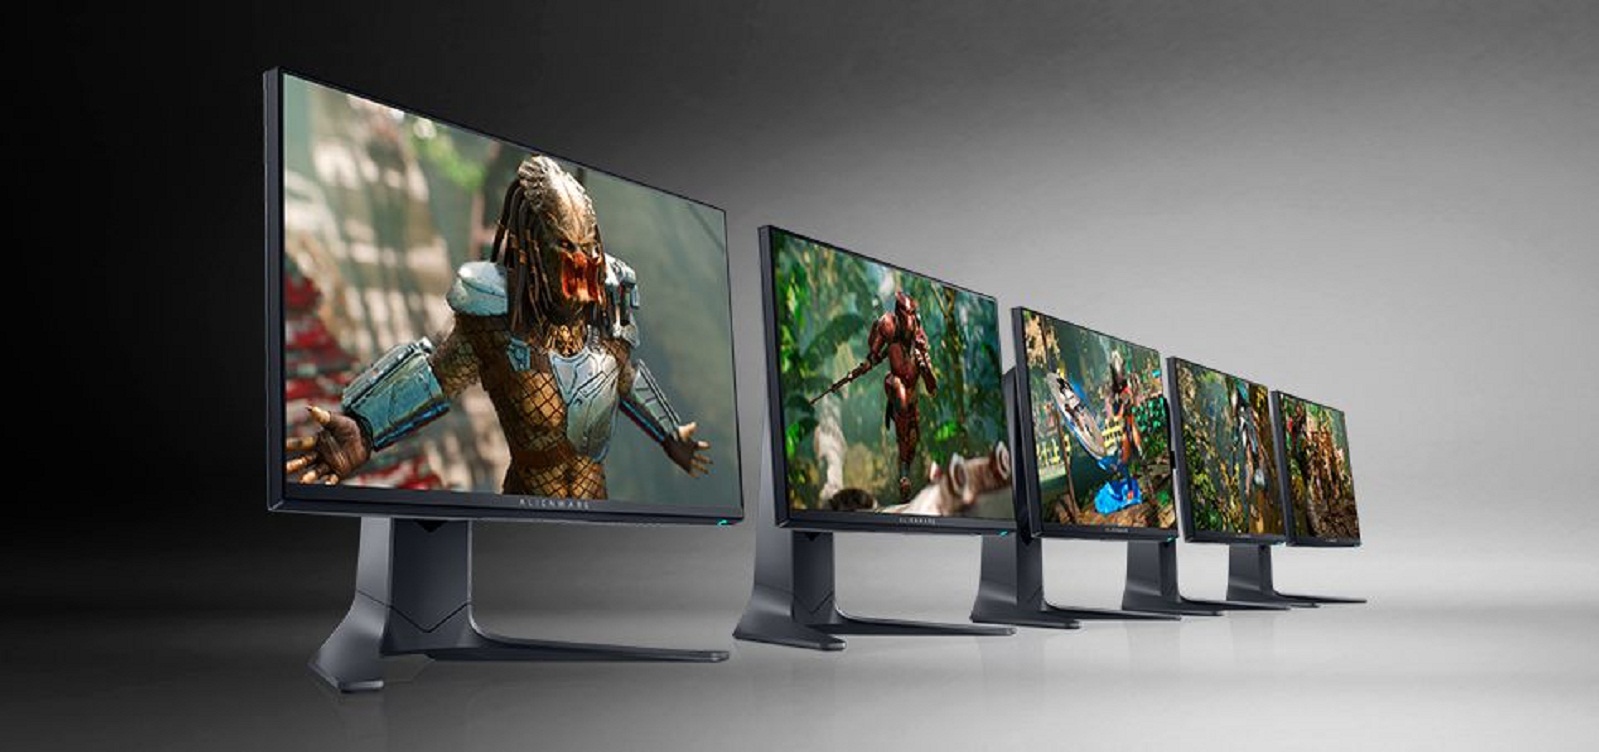 Alienware’s Recent AW2521HF Gaming Monitor Comes With A 24.5 Monitor With A Native Refresh Rate Of Up To 240Hz